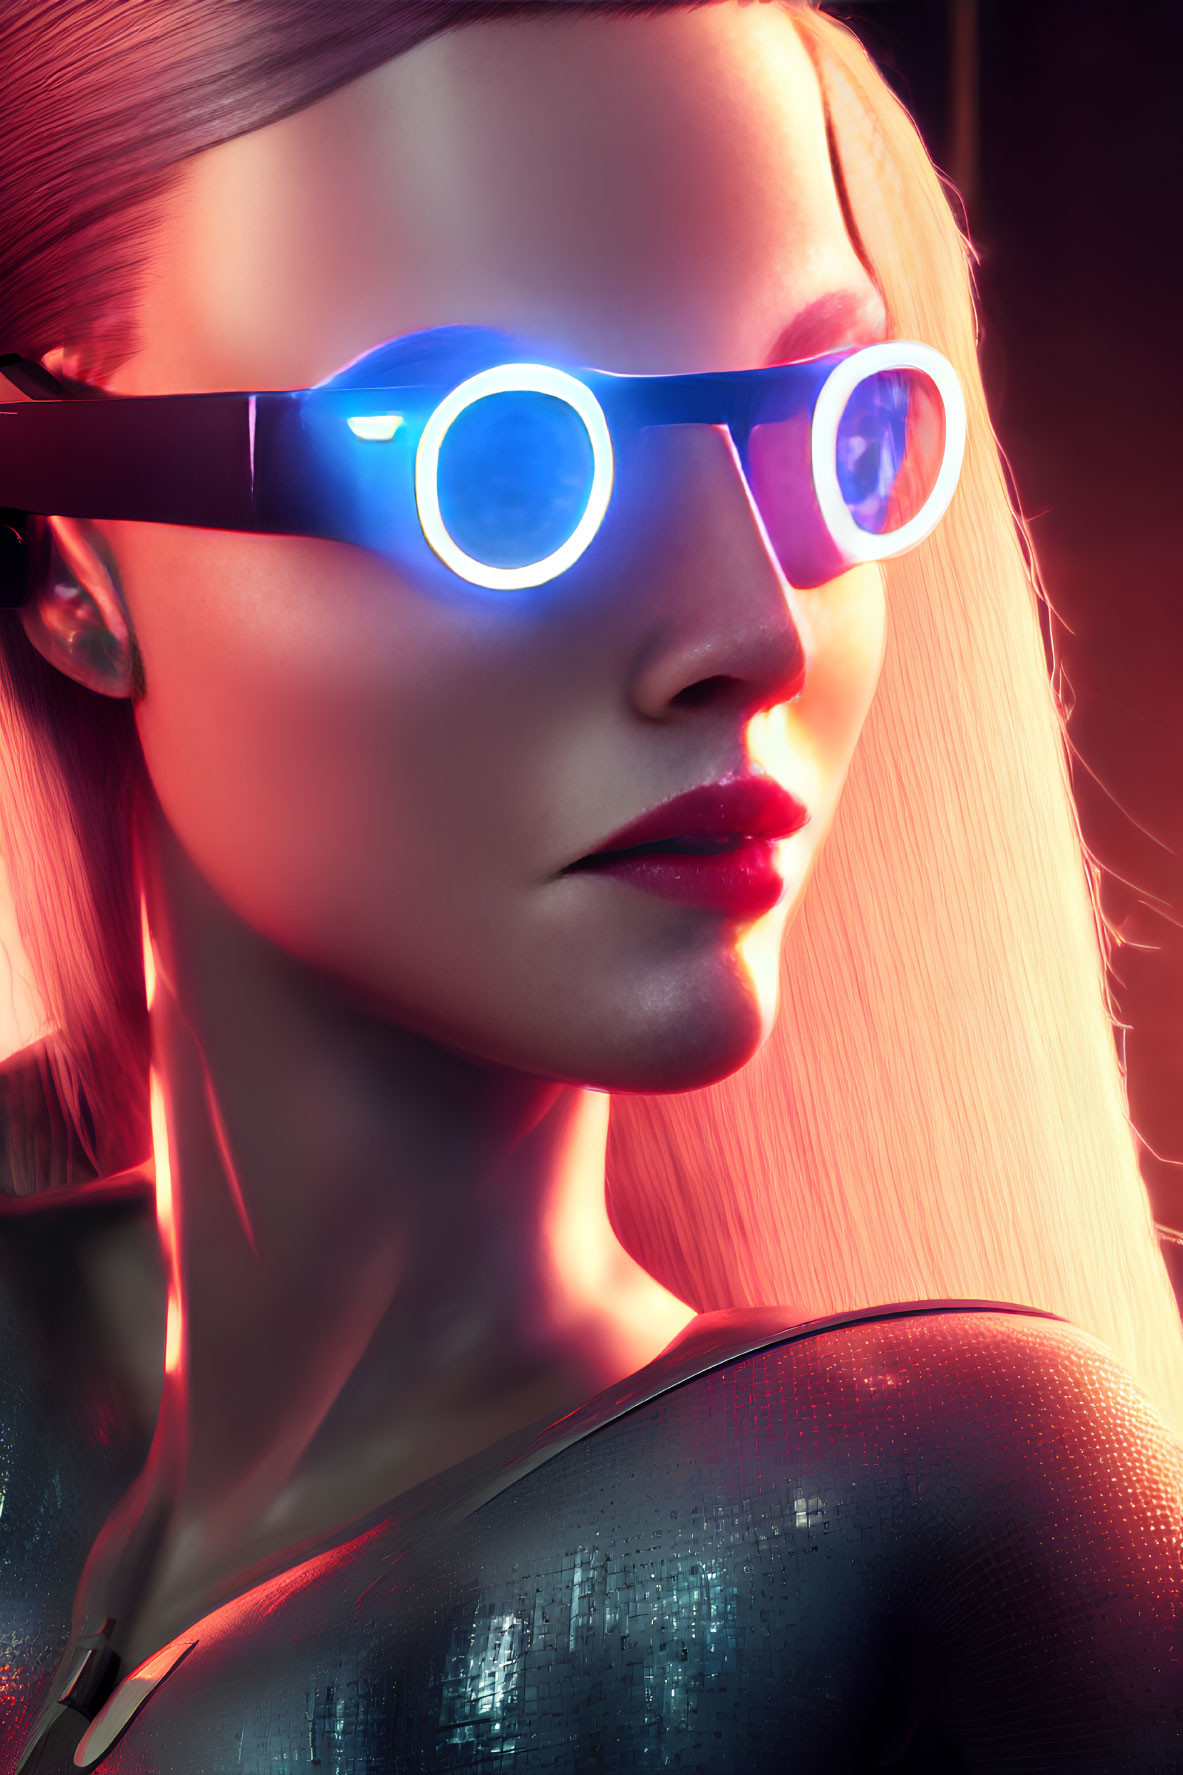 Blonde woman with blue circular glasses in futuristic setting